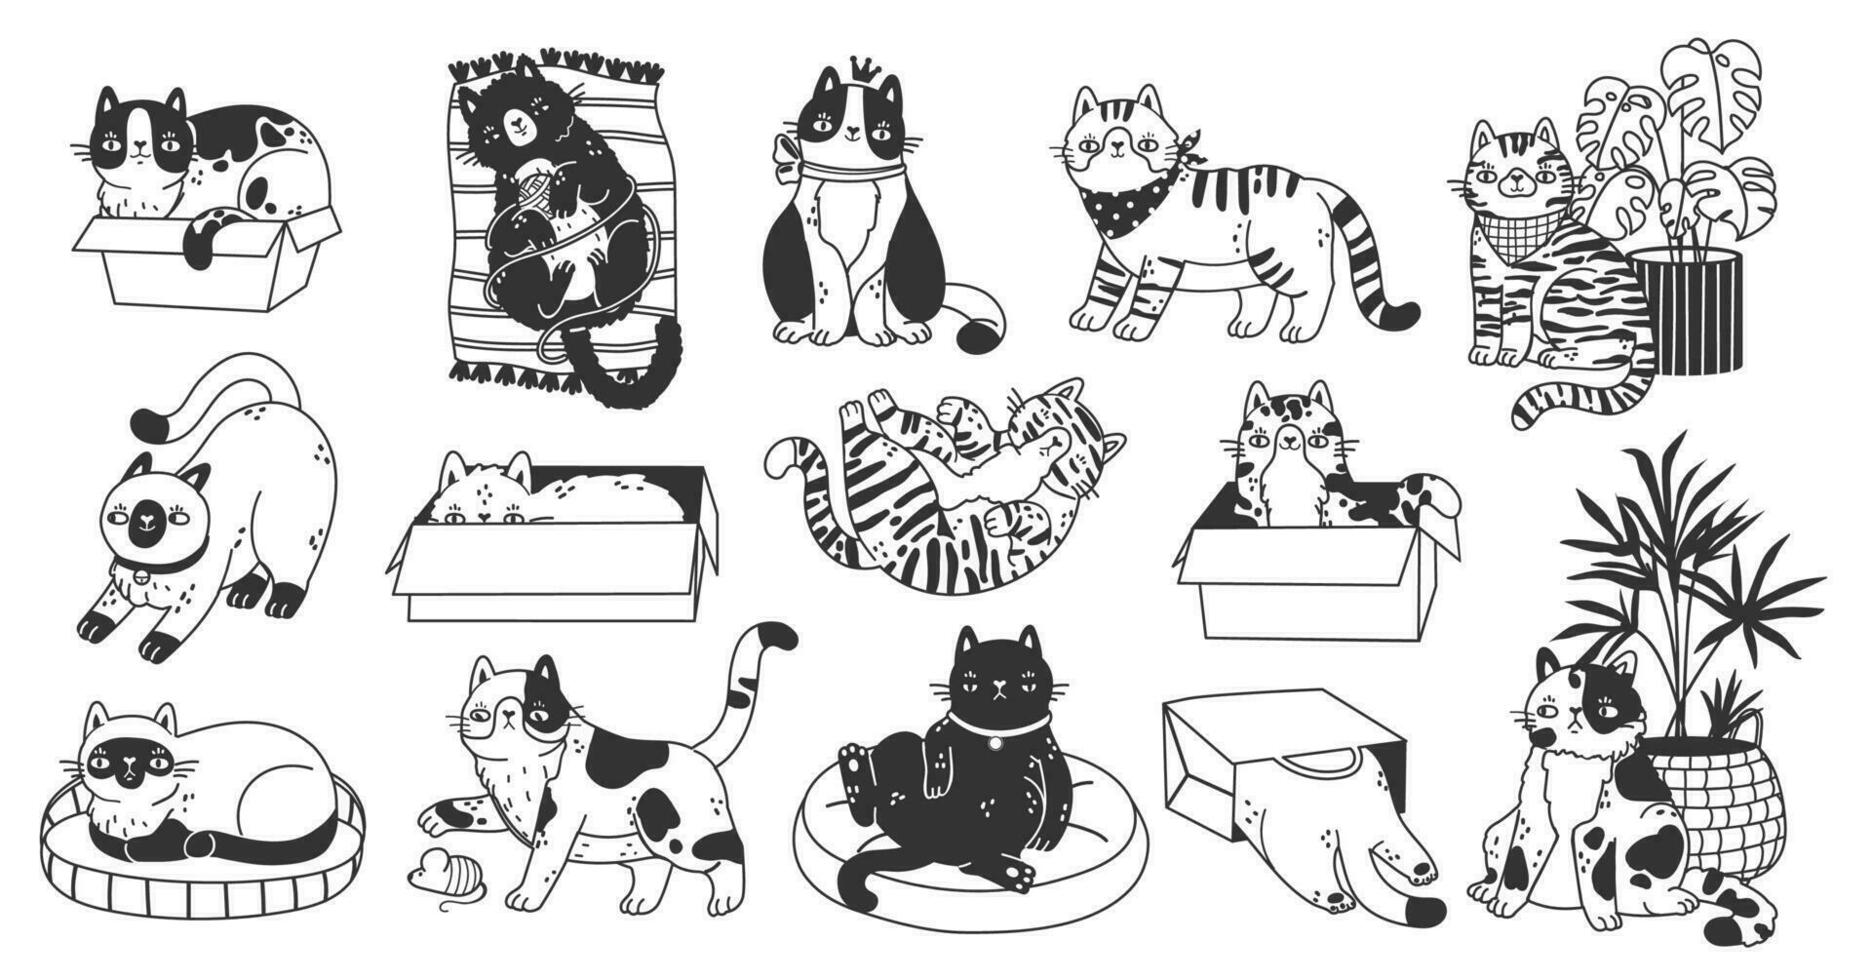 Doodle sketch cute cats characters. Funny hand drawn pets in boxes, baskets, on rugs with plants isolated on white background. Vector set